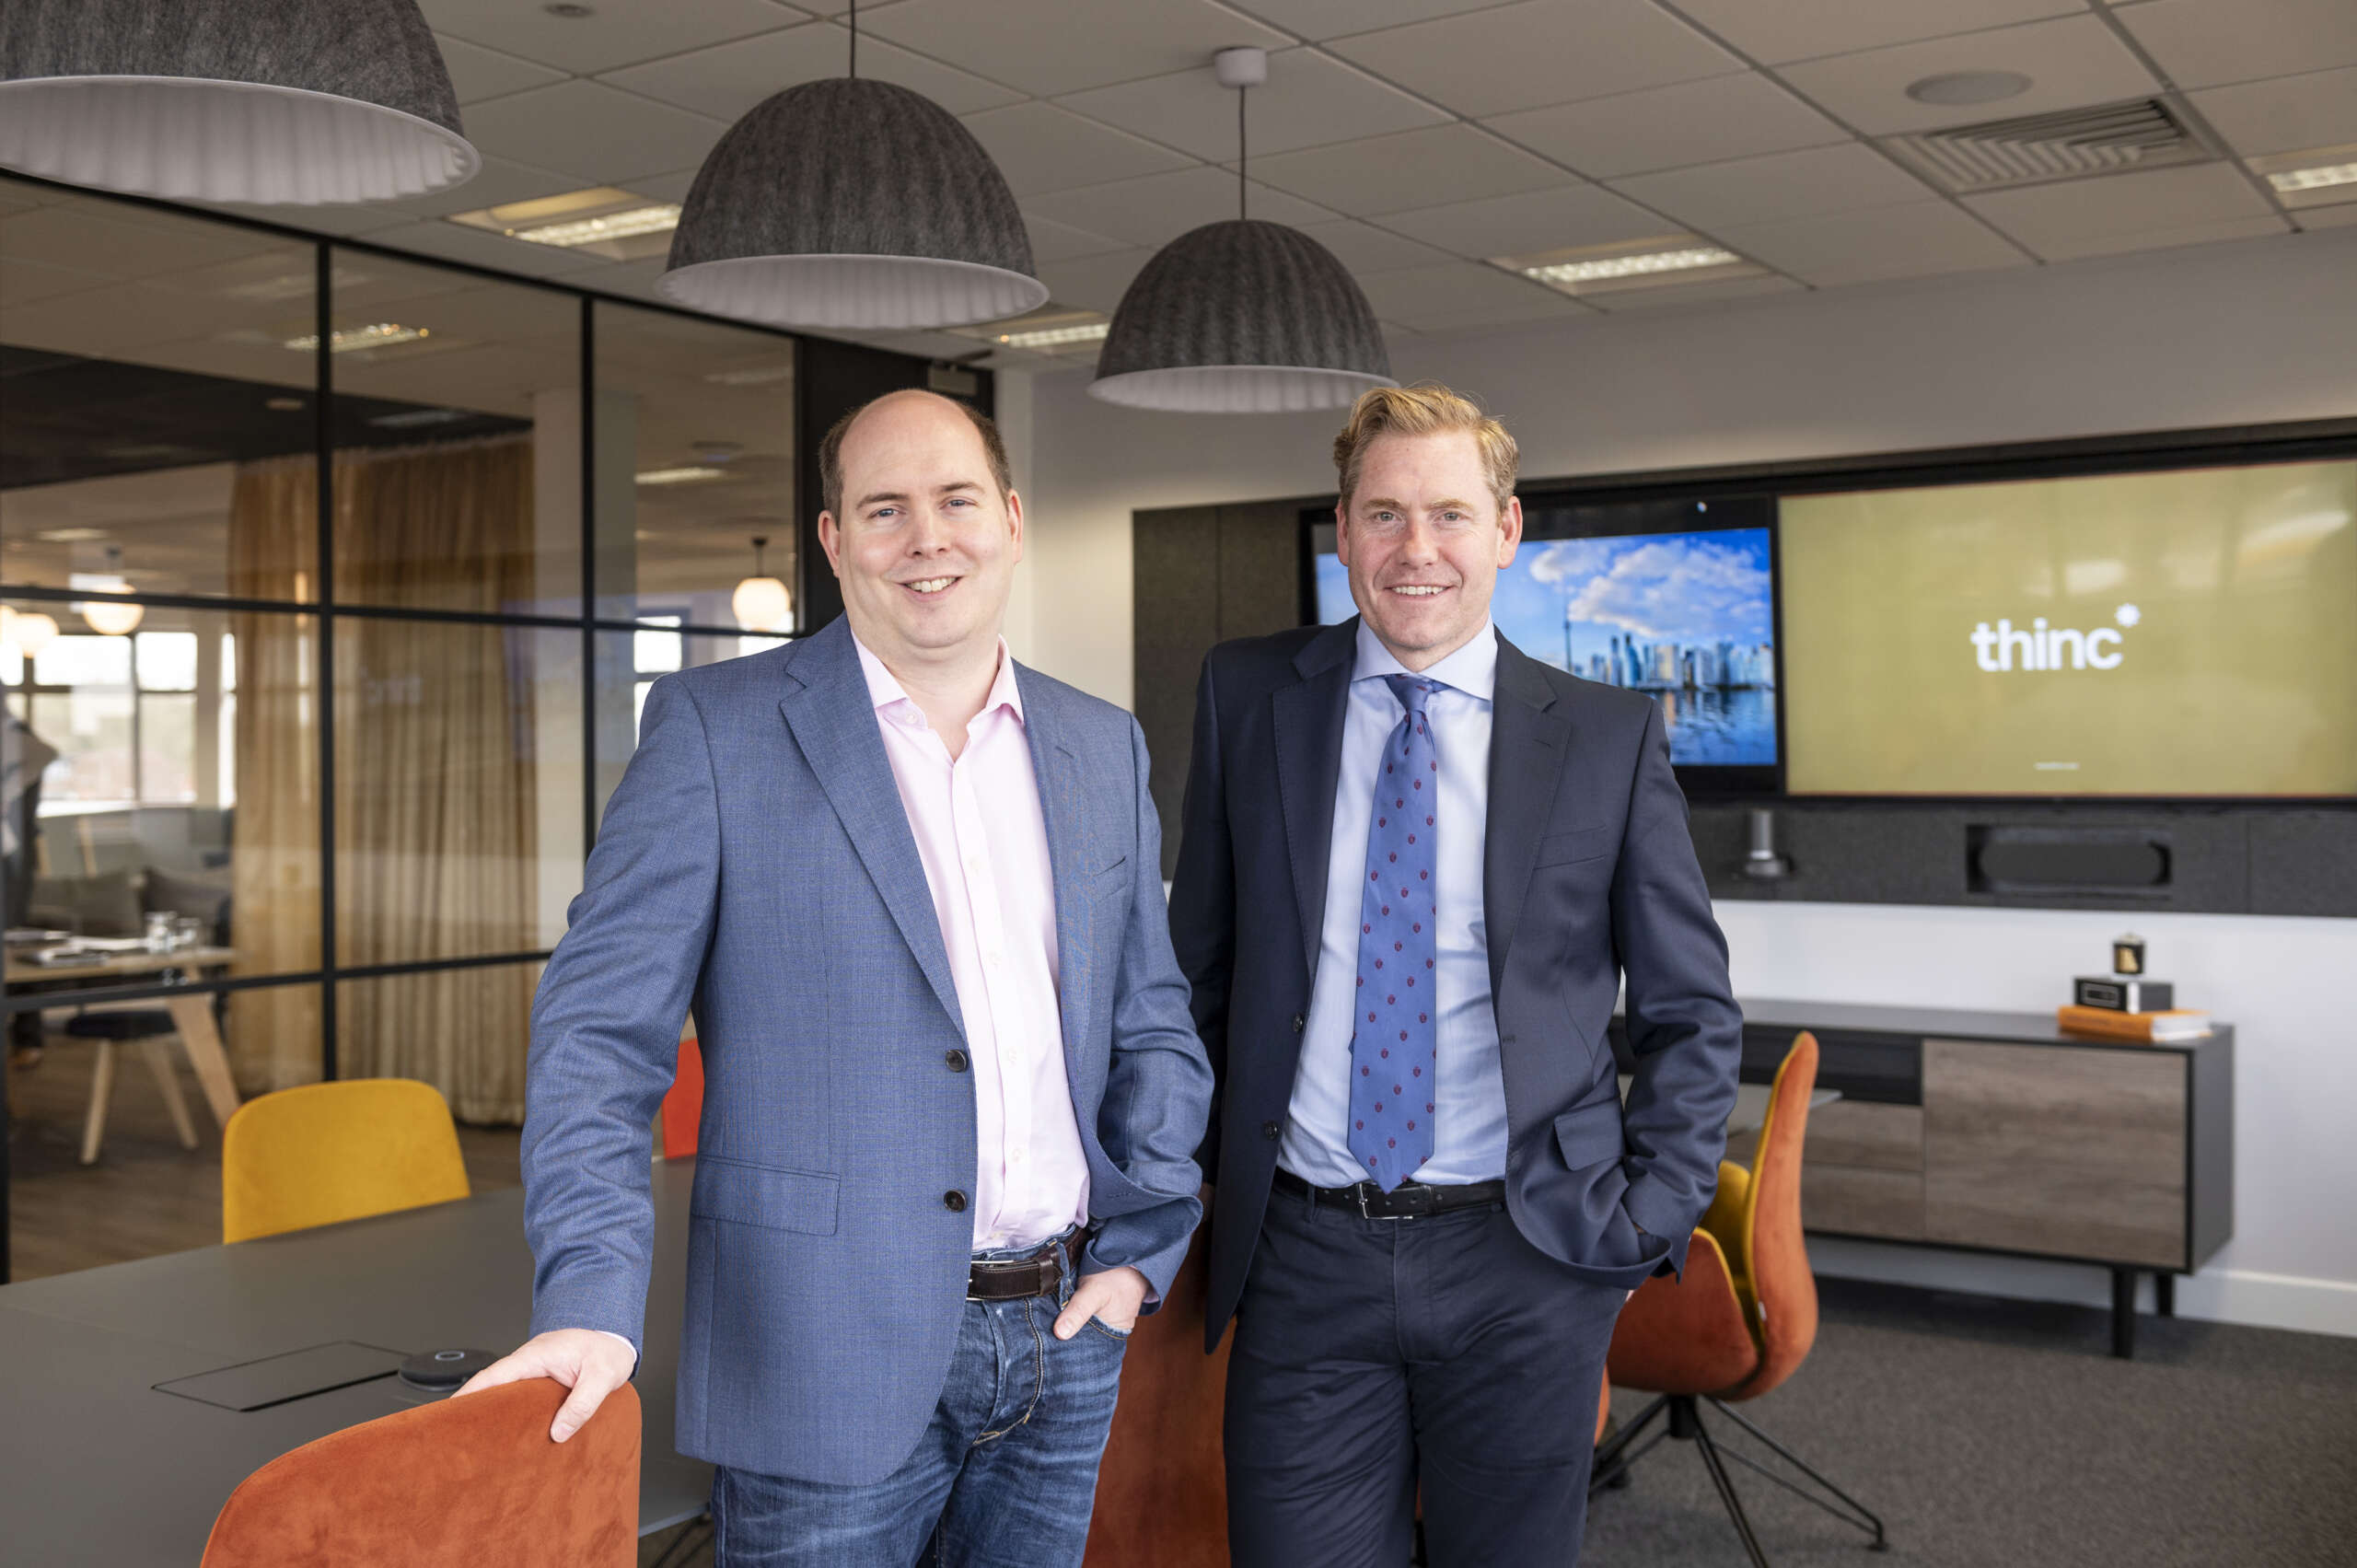 Thinc Operations Director Richard Stathers with Thinc Managing Director Dominic Ball, in Thinc's Manchester office.